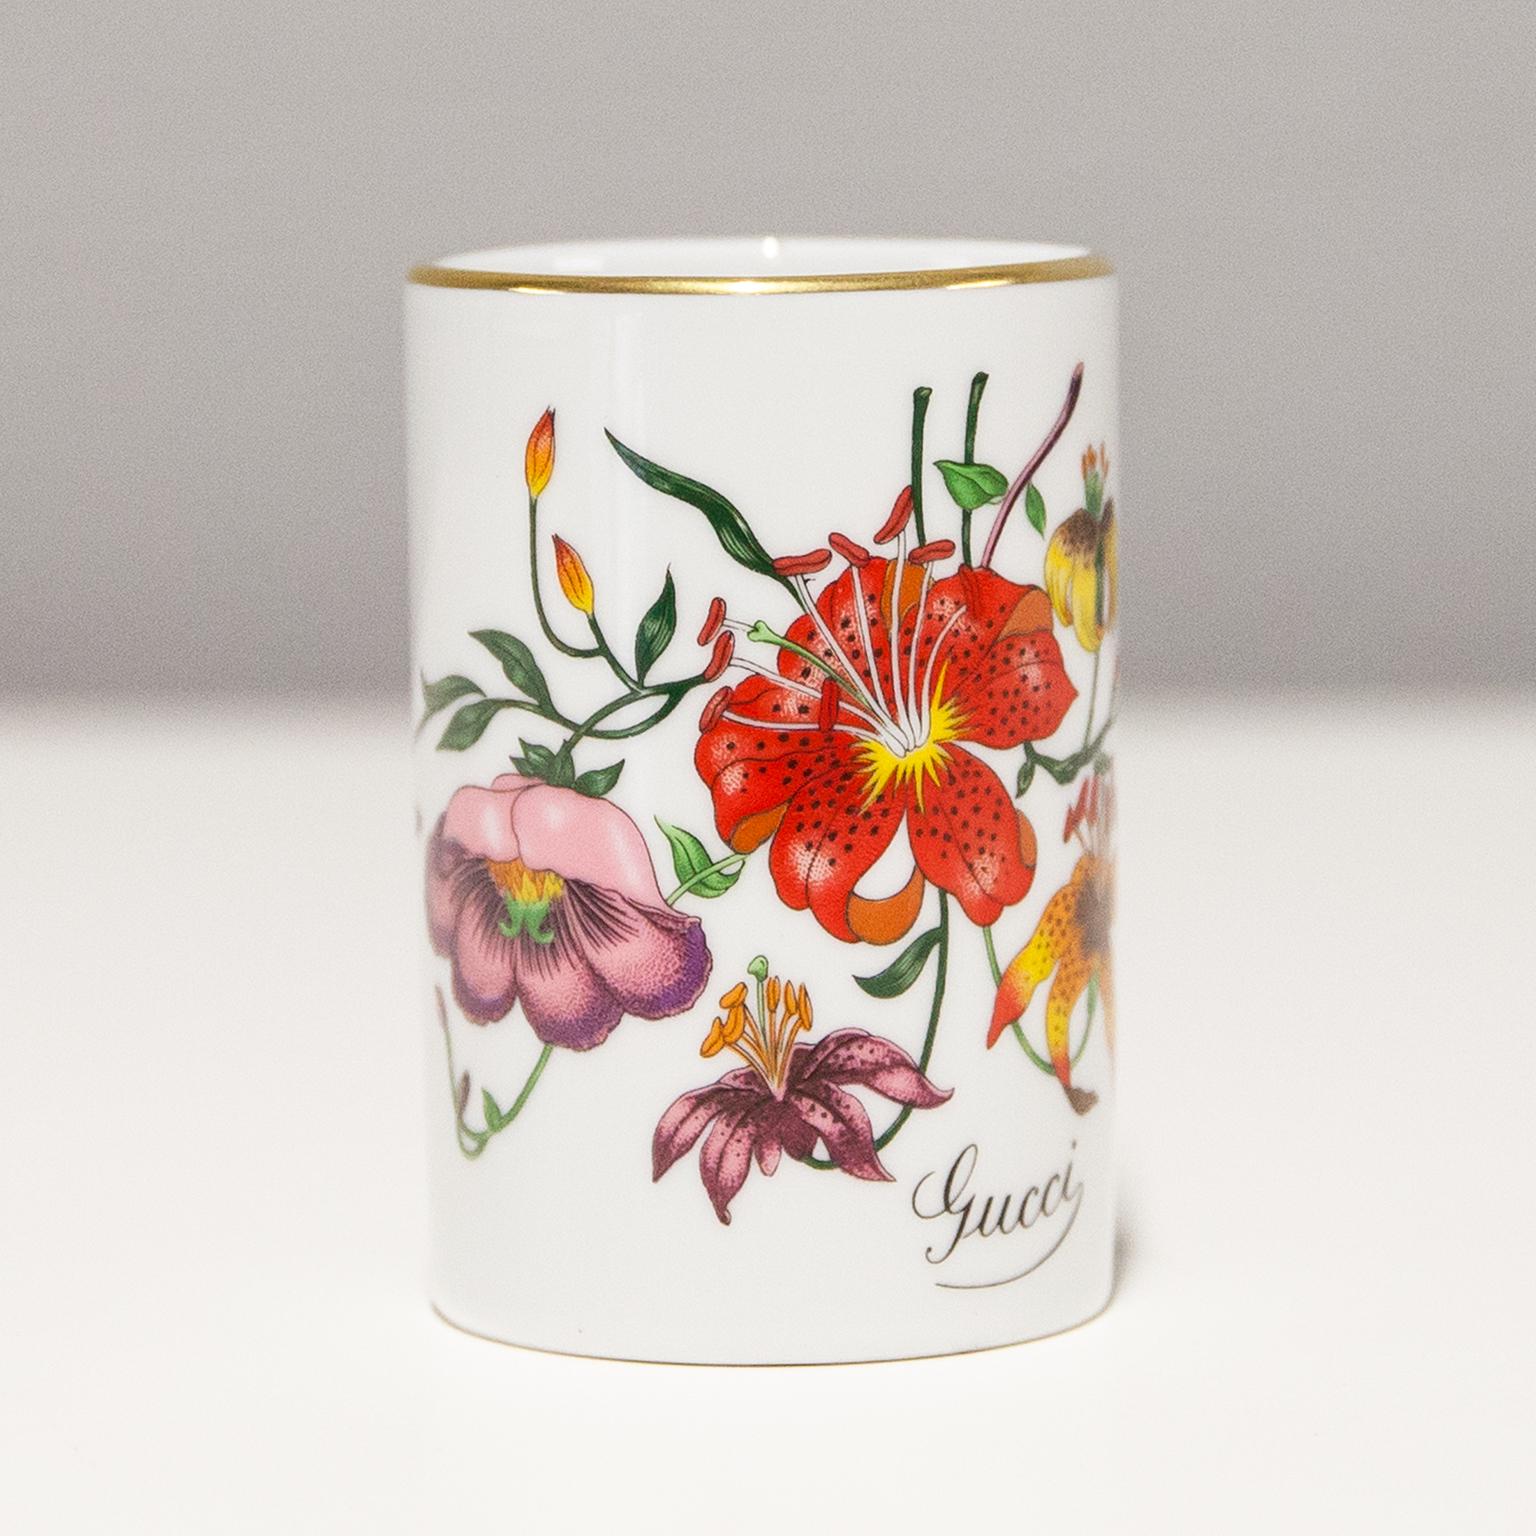 Gucci Vintage porcelain mug or tea cup in hand painted floral design. Signed with Gucci and made by Richard Ginori in the 1970s. This wonderful piece is in very good vintage condition.